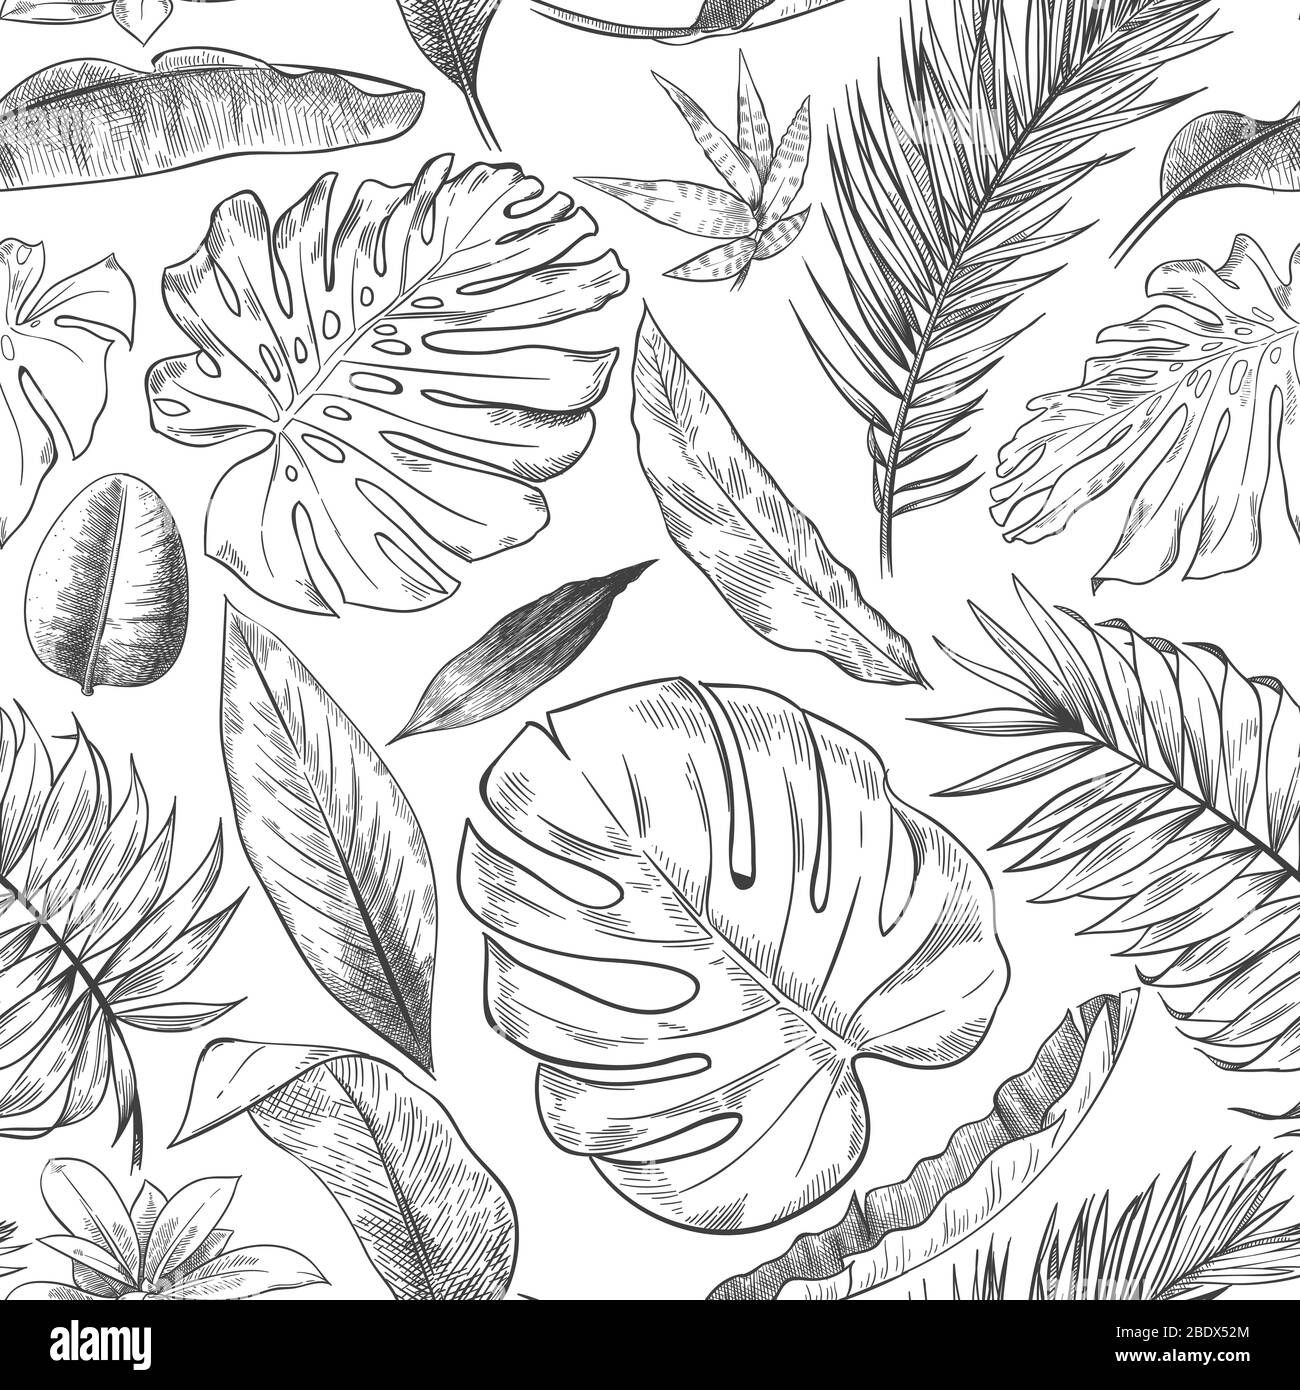 Hand drawn tropical leaves pattern. Sketch drawing palm branch, monstera leaf and exotic forest plants leaf seamless vector background illustration Stock Vector